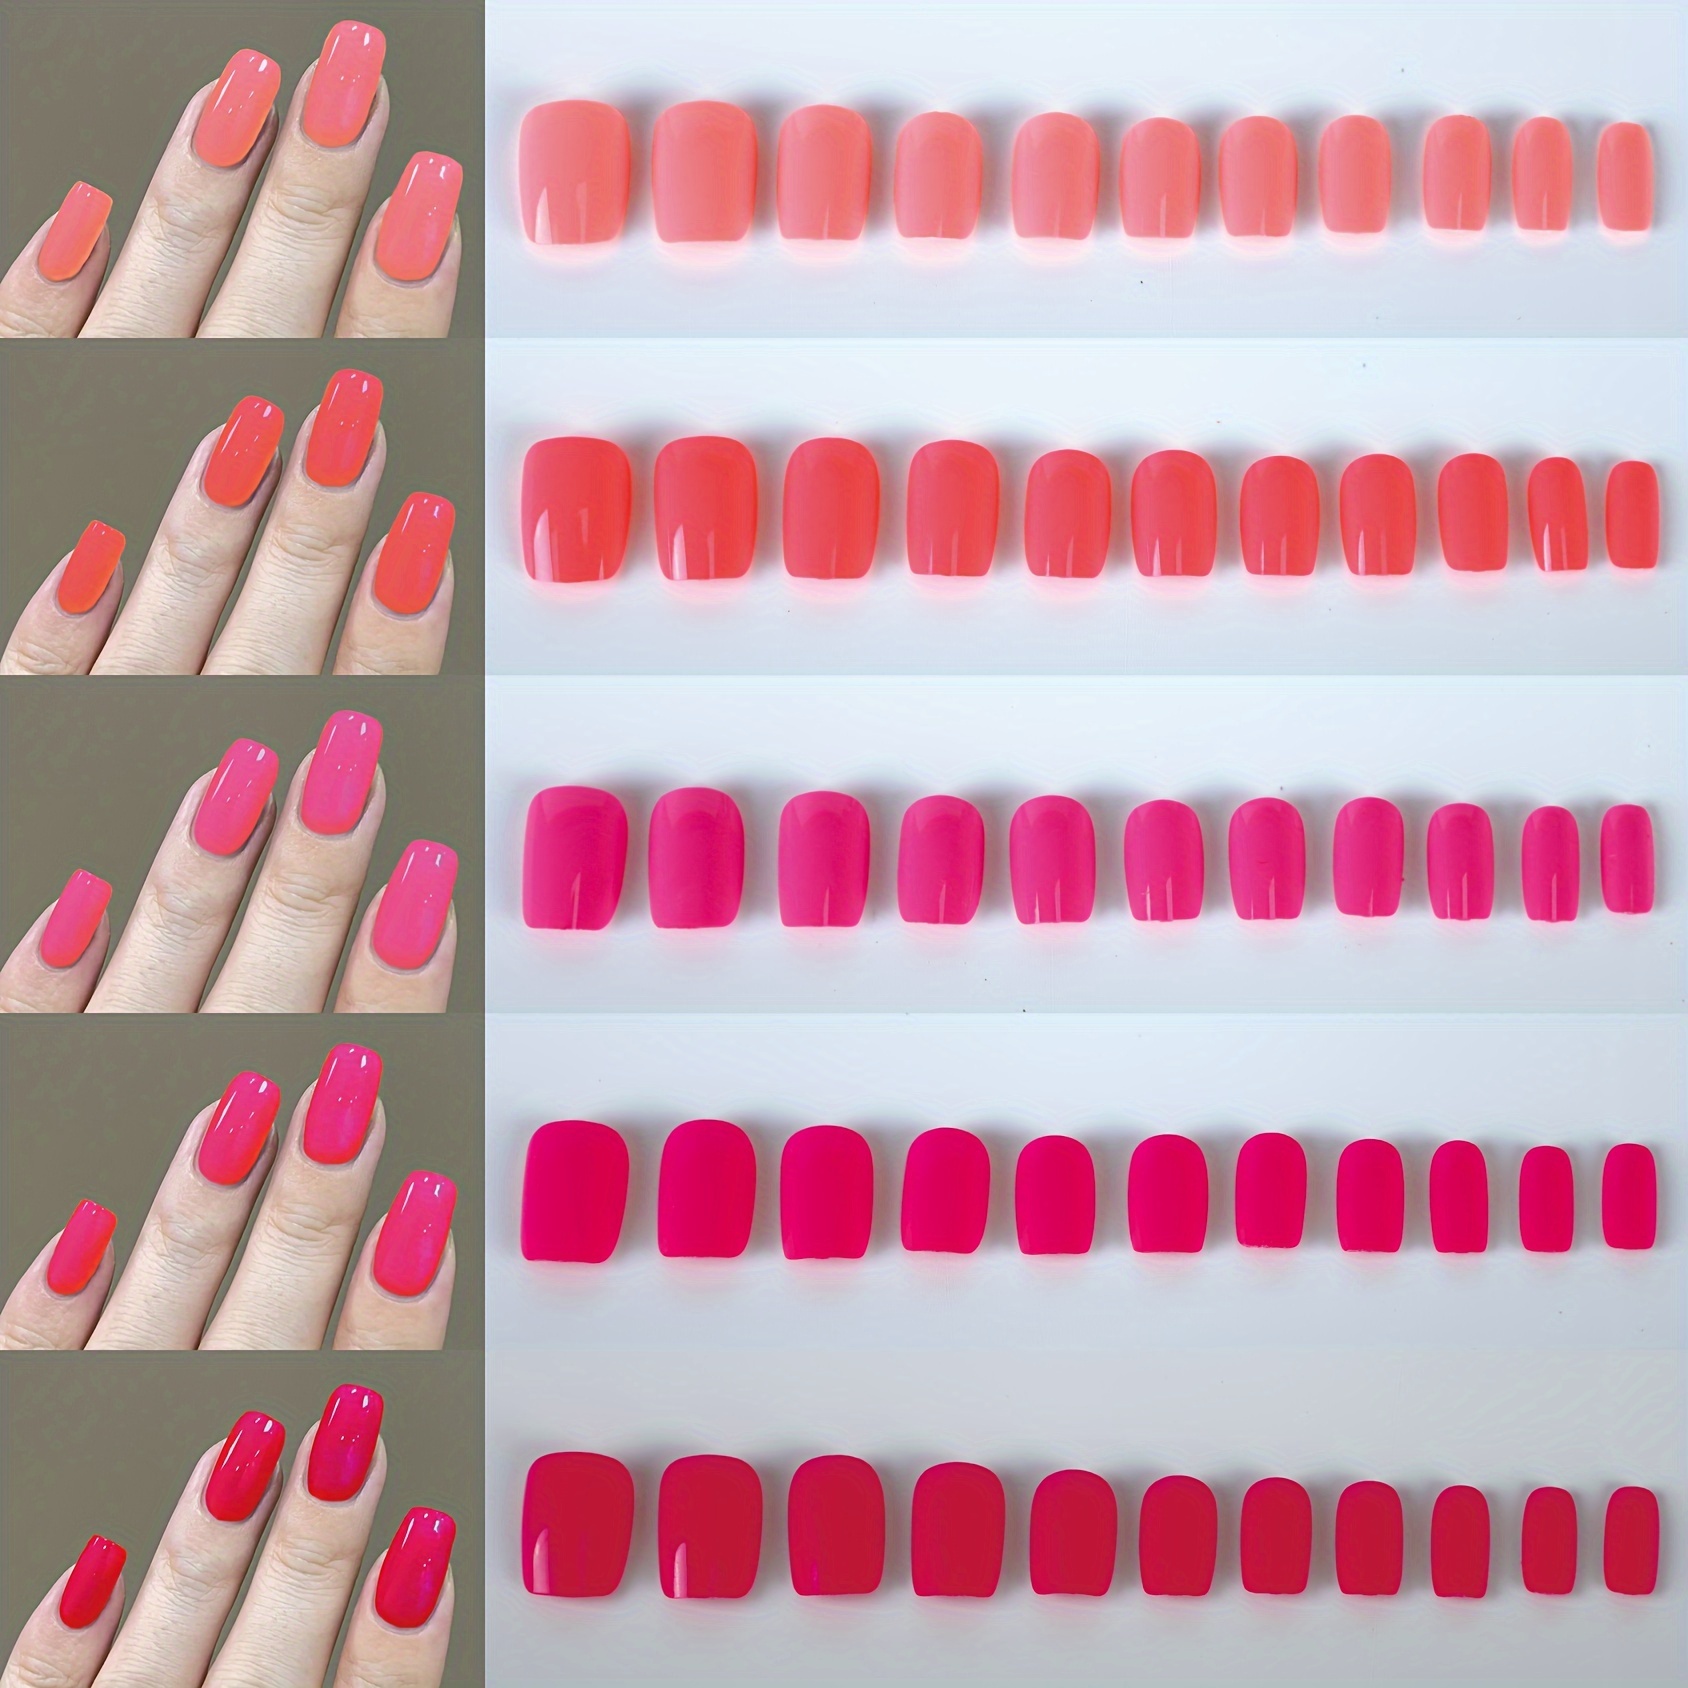 

150 Pcs Pink Series Short Square Press-on Nails Set - 5 Styles, Mix And Match, Easy Application, Diy Manicure Kit With Storage Box By